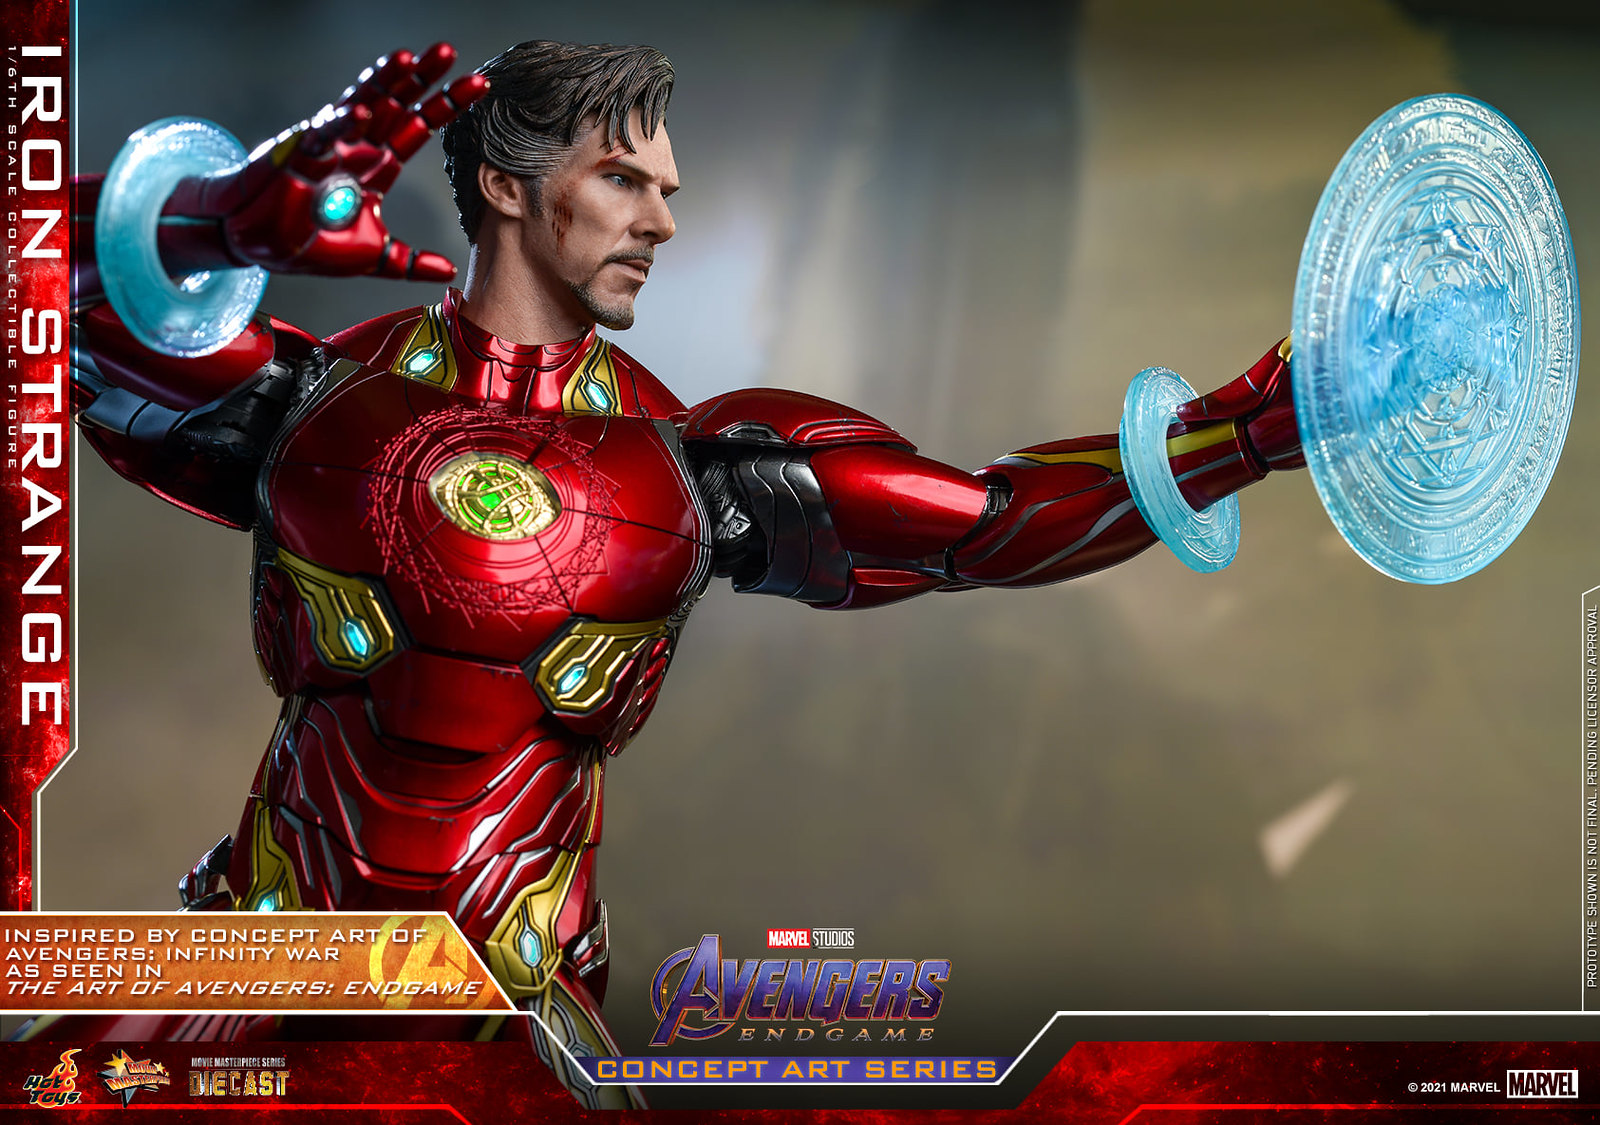 NEW PRODUCT: Hot Toys Avengers: Endgame (Concept Art Series) - 1/6th scale Iron Strange Collectible Figure 51312230480_ff5b283092_h